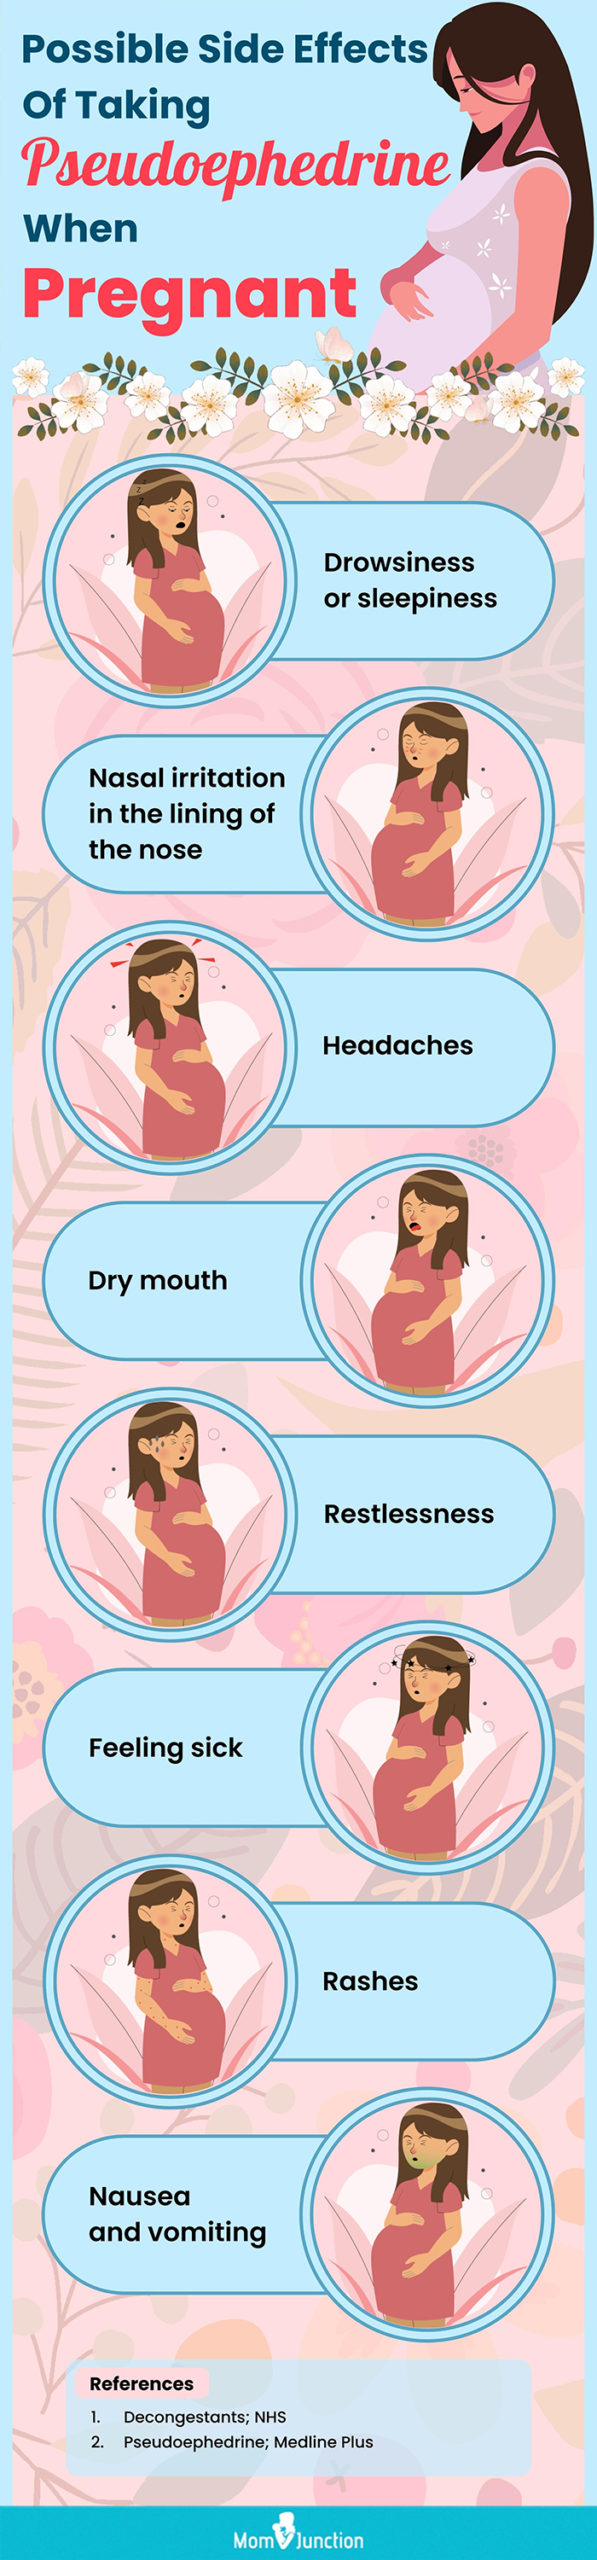 possible side effects of taking pseudoephedrine when pregnant (infographic)